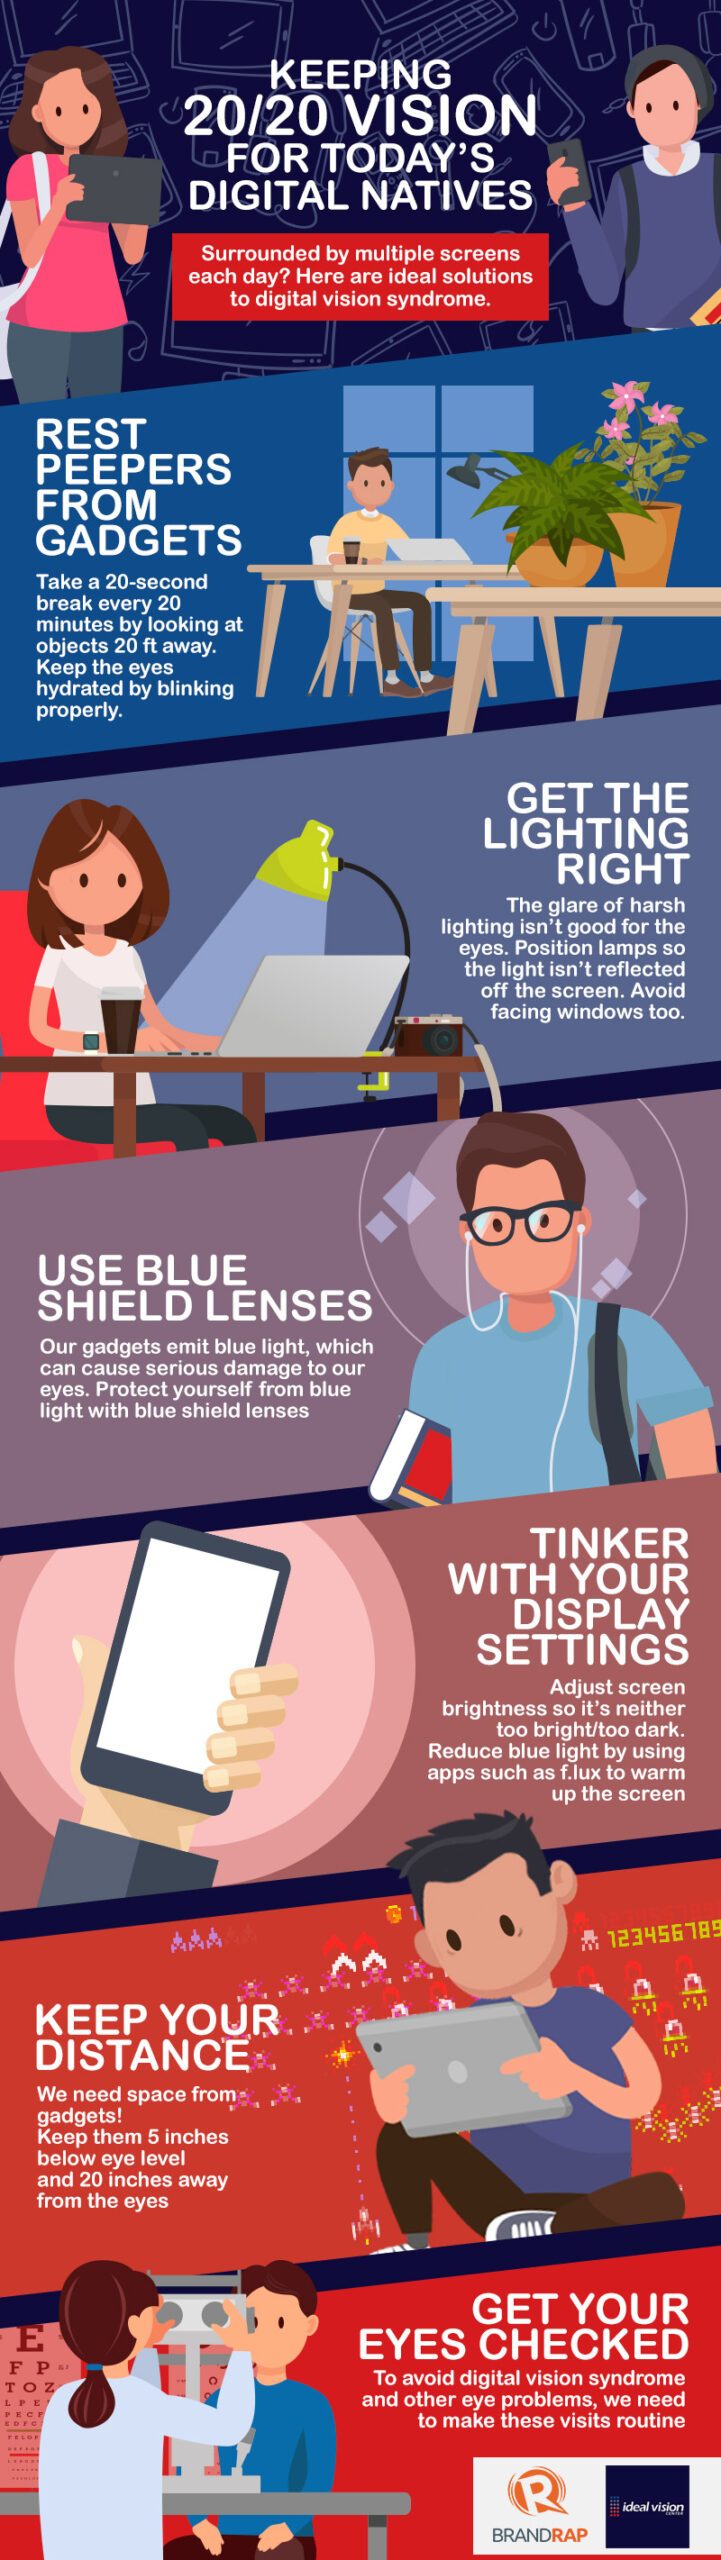 INFOGRAPHIC: Keeping 20/20 vision for today’s digital natives